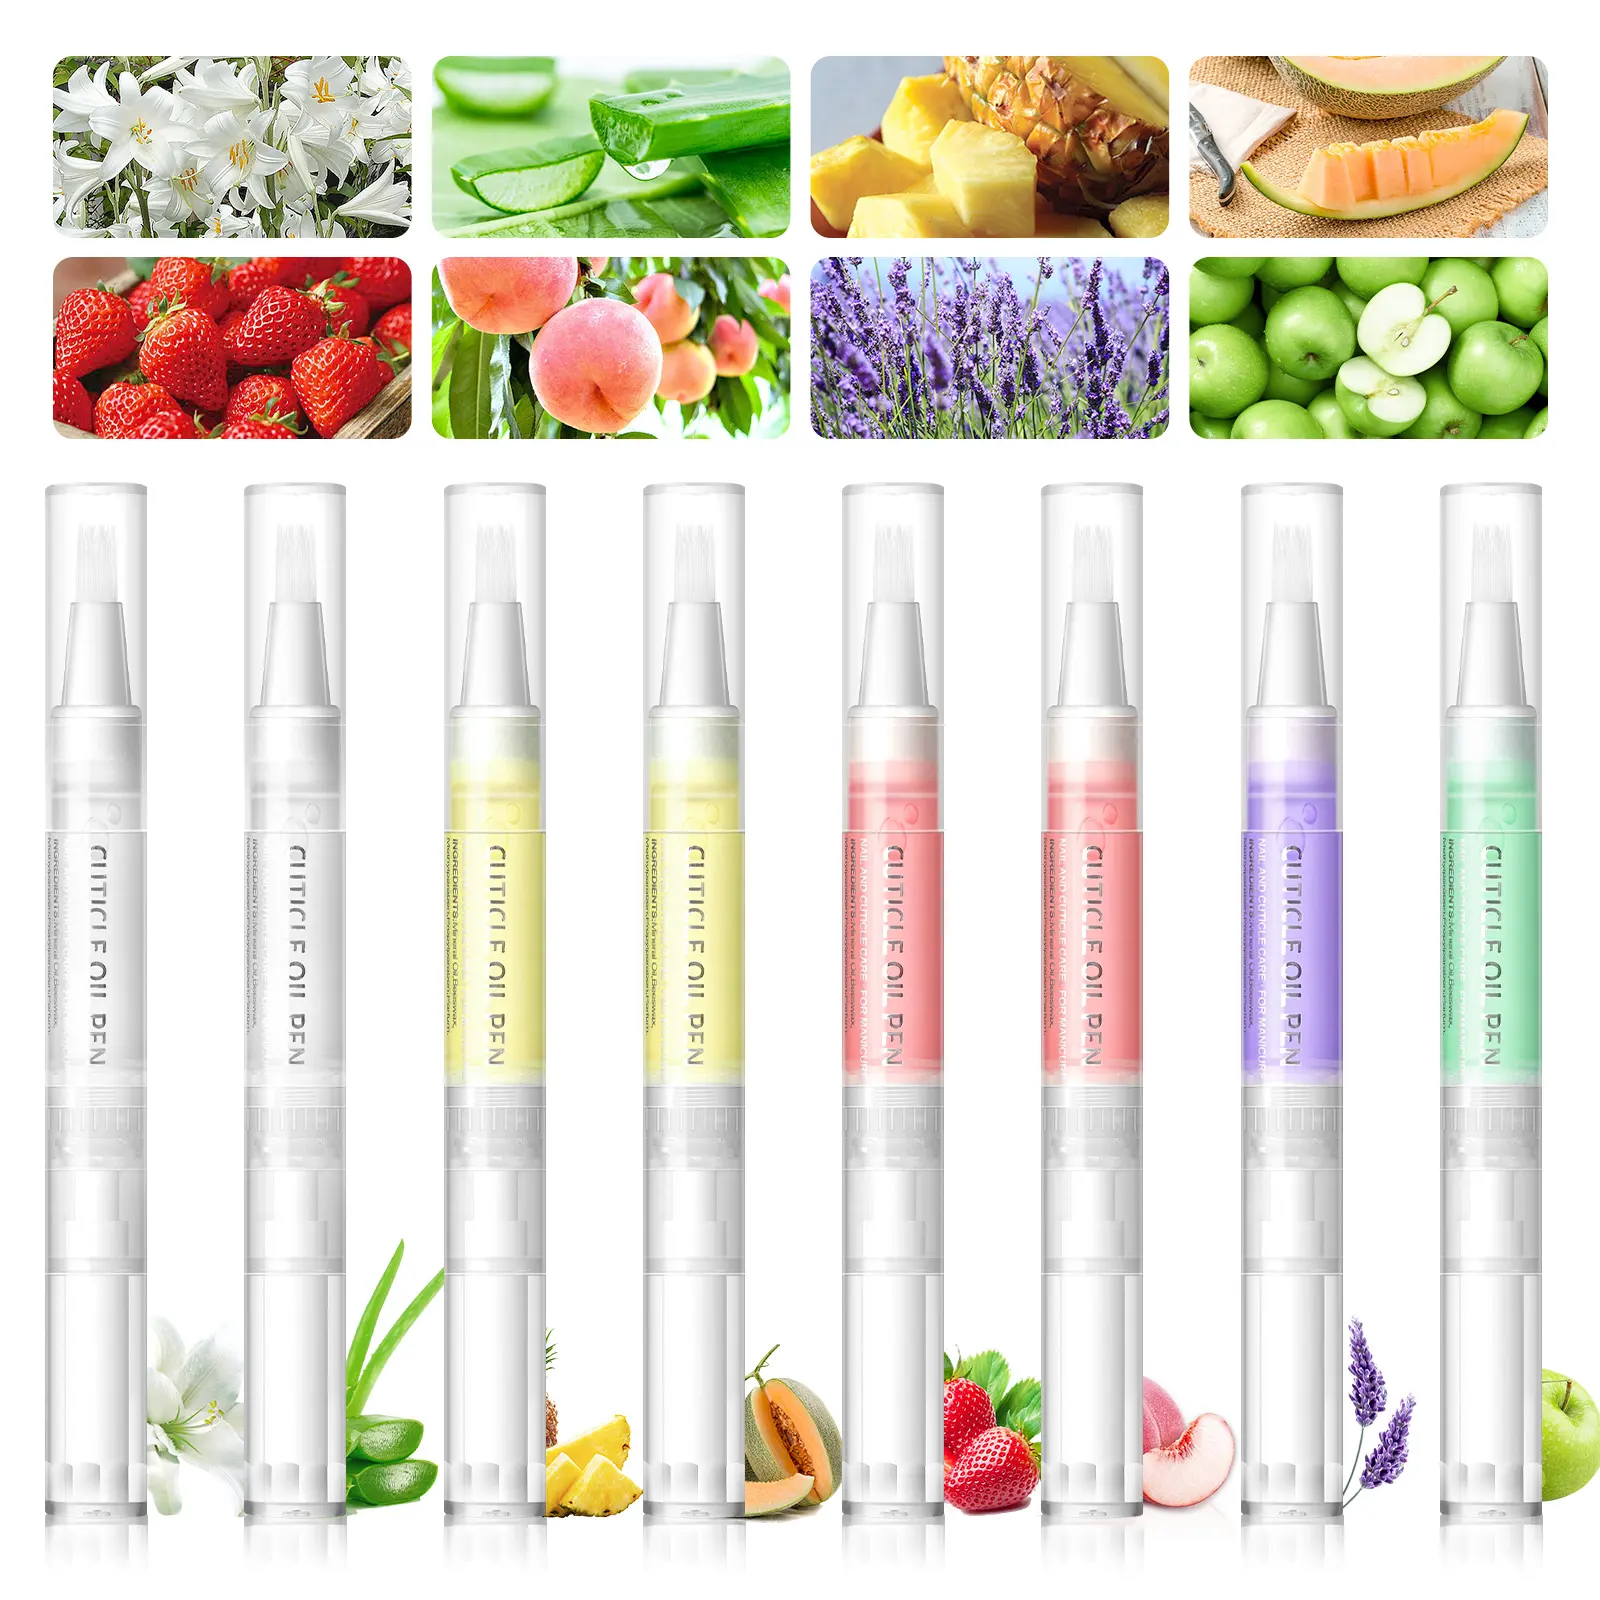 Different Flavors Nail Care Oil Nail Art Treatment Nail Pen Nutritional Cuticle Revitalizer Oil Beauty Personal Care